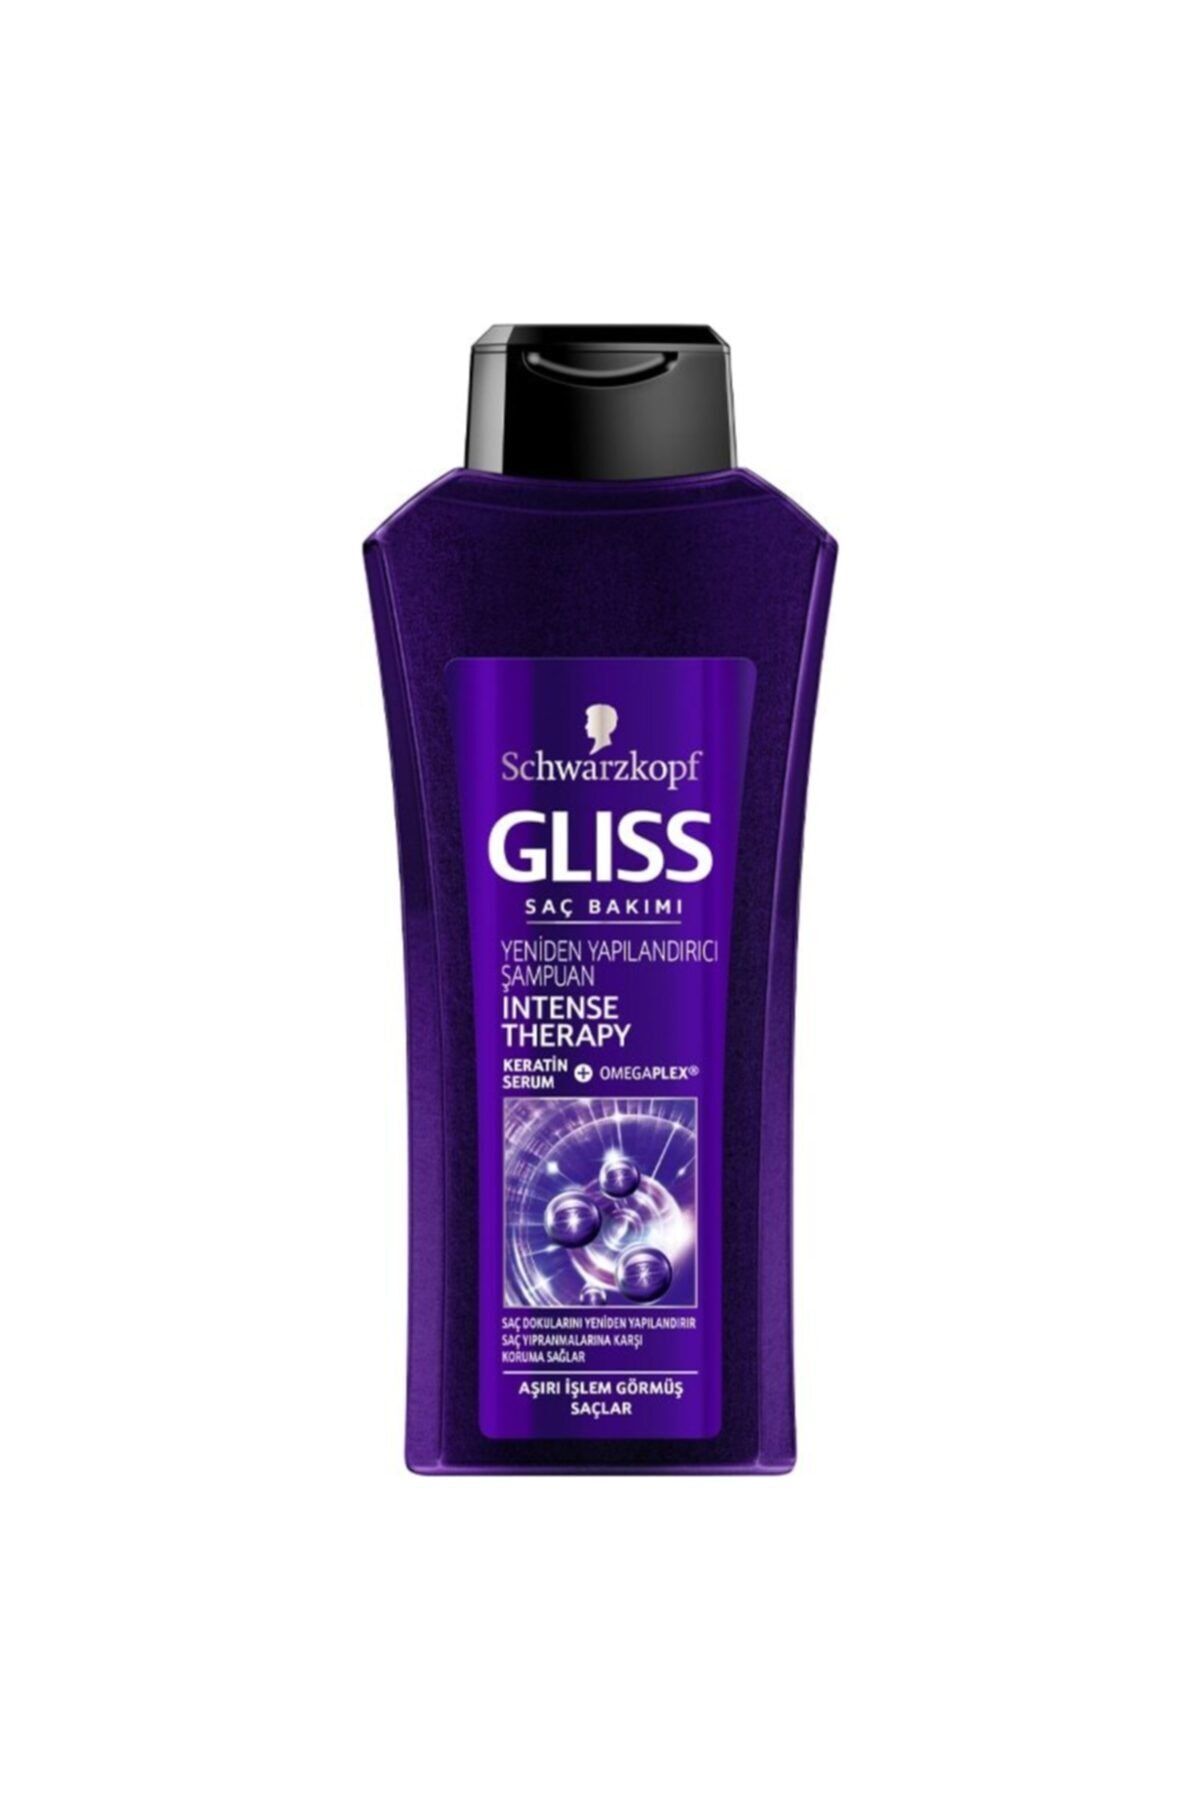 Gliss Intense Therapy Şampuan 500 Ml